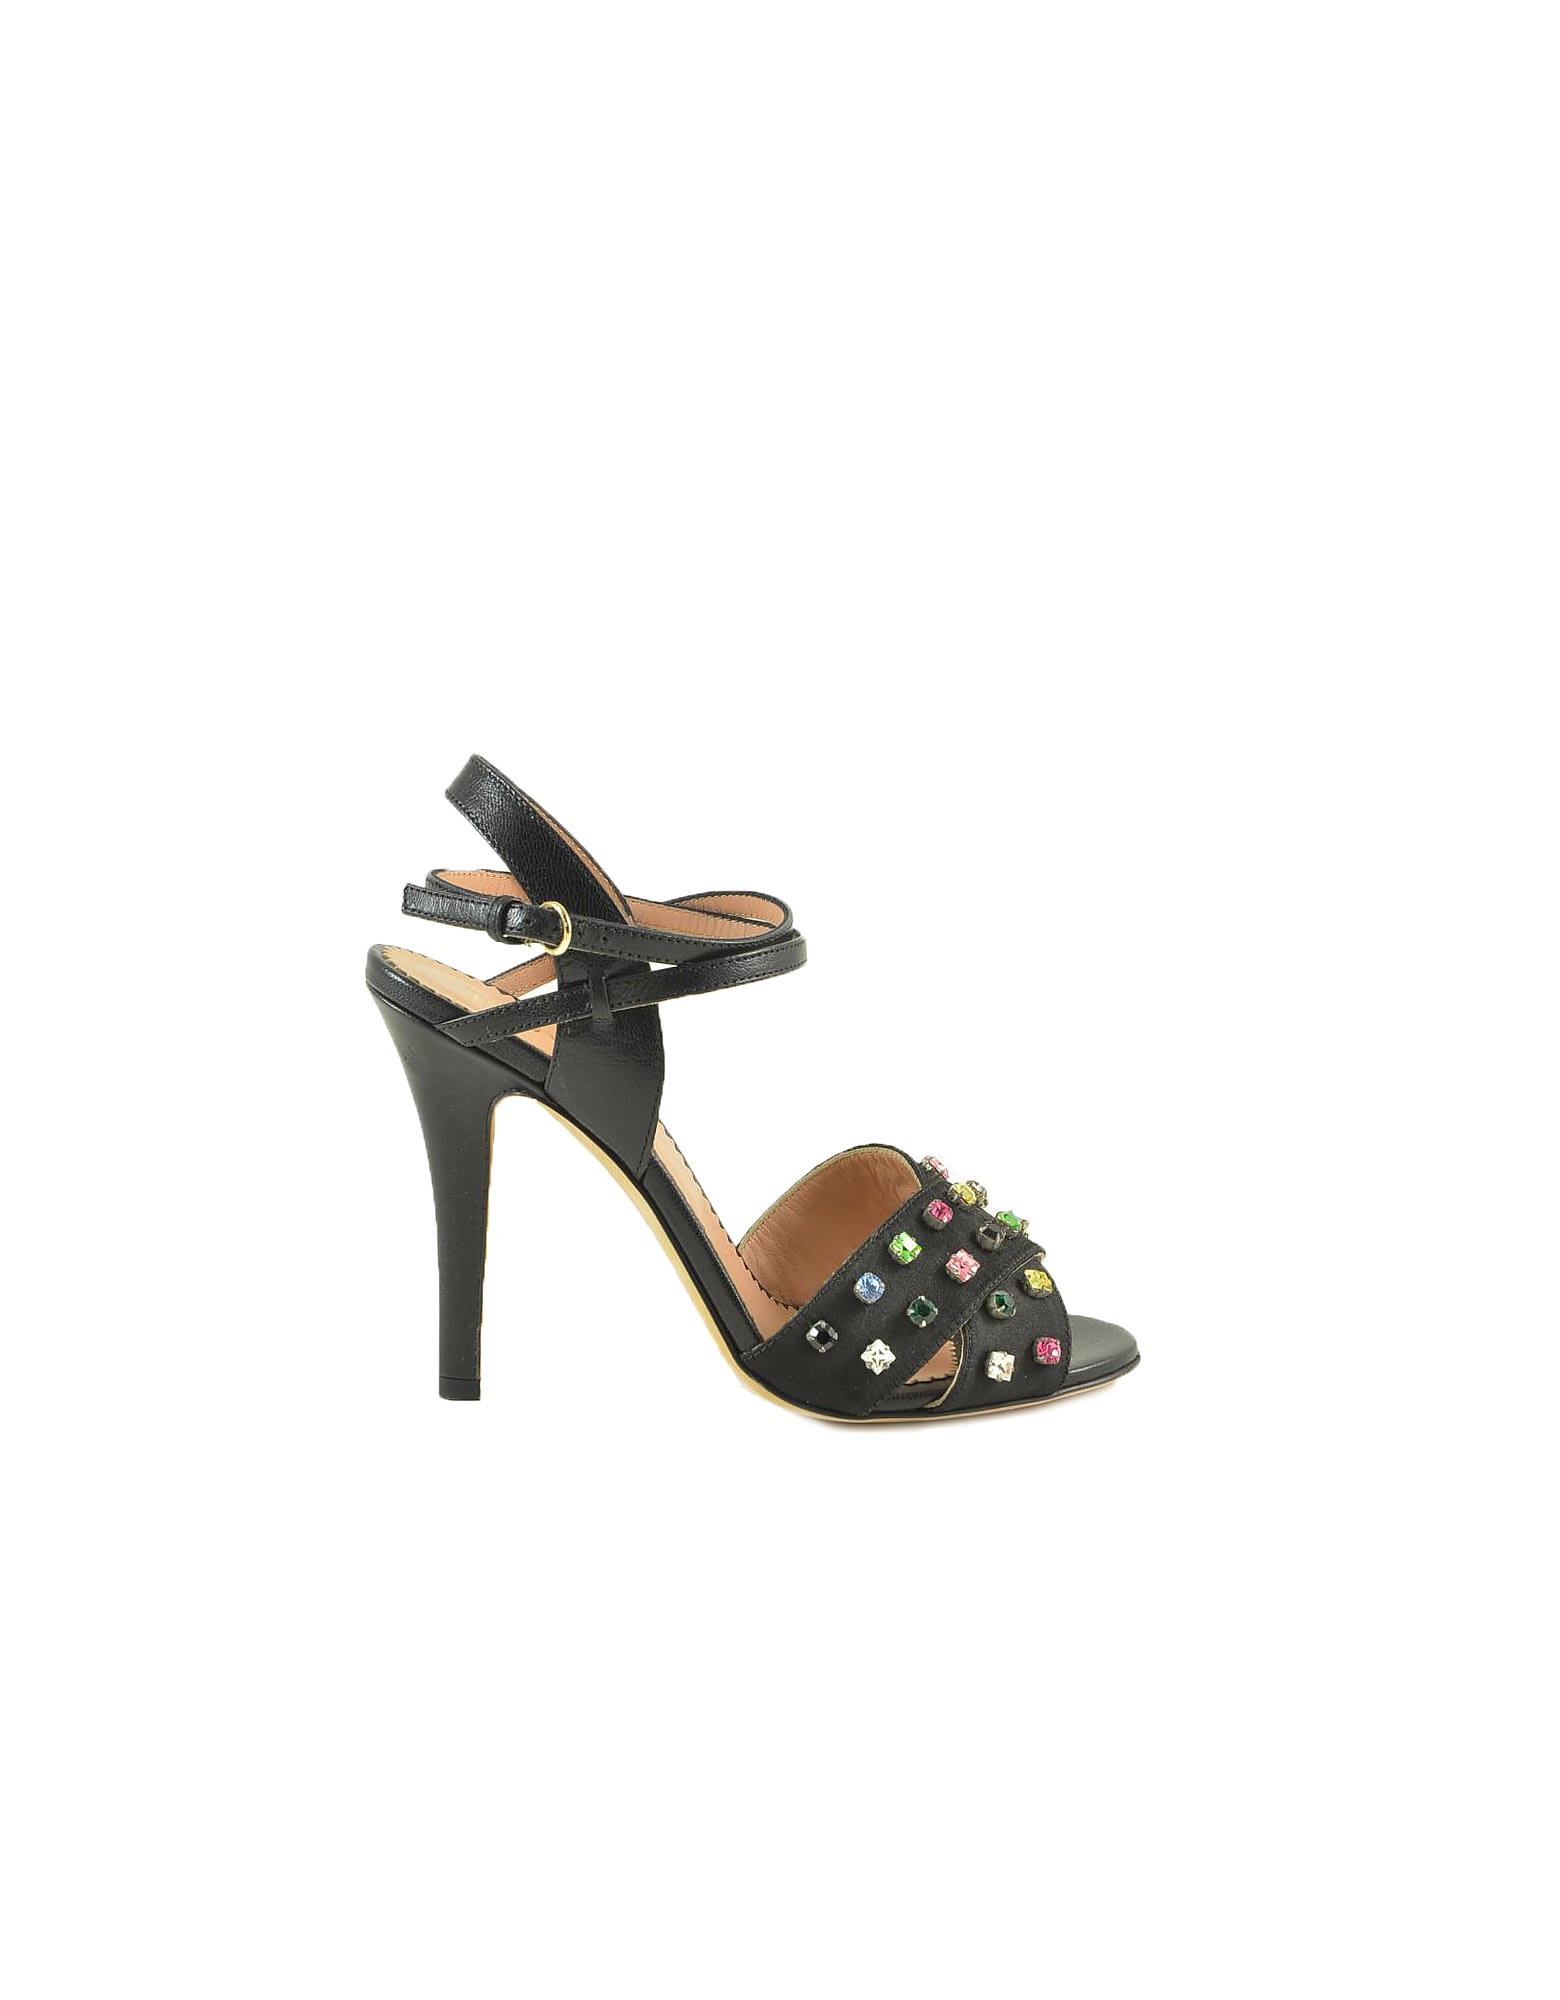 Red Valentino Black Leather High Heel Sandals W/multicolor Crystals